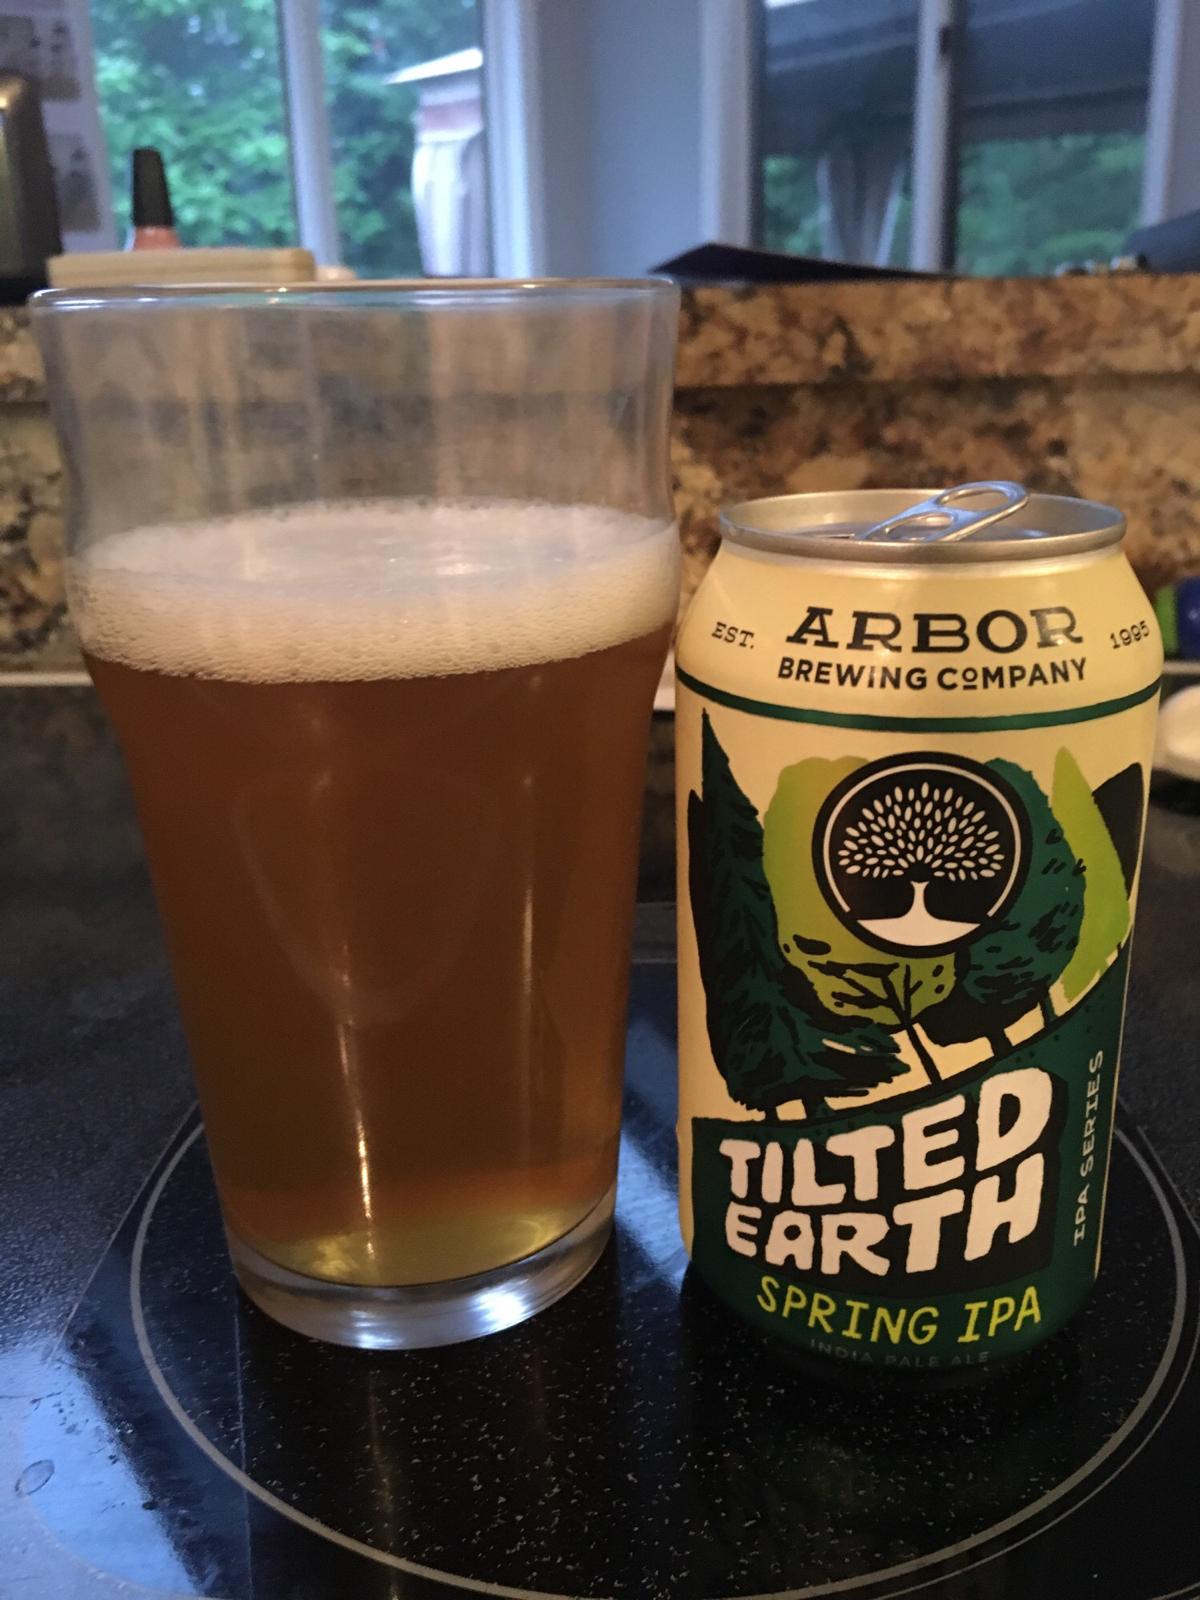 Tilted Earth Spring IPA